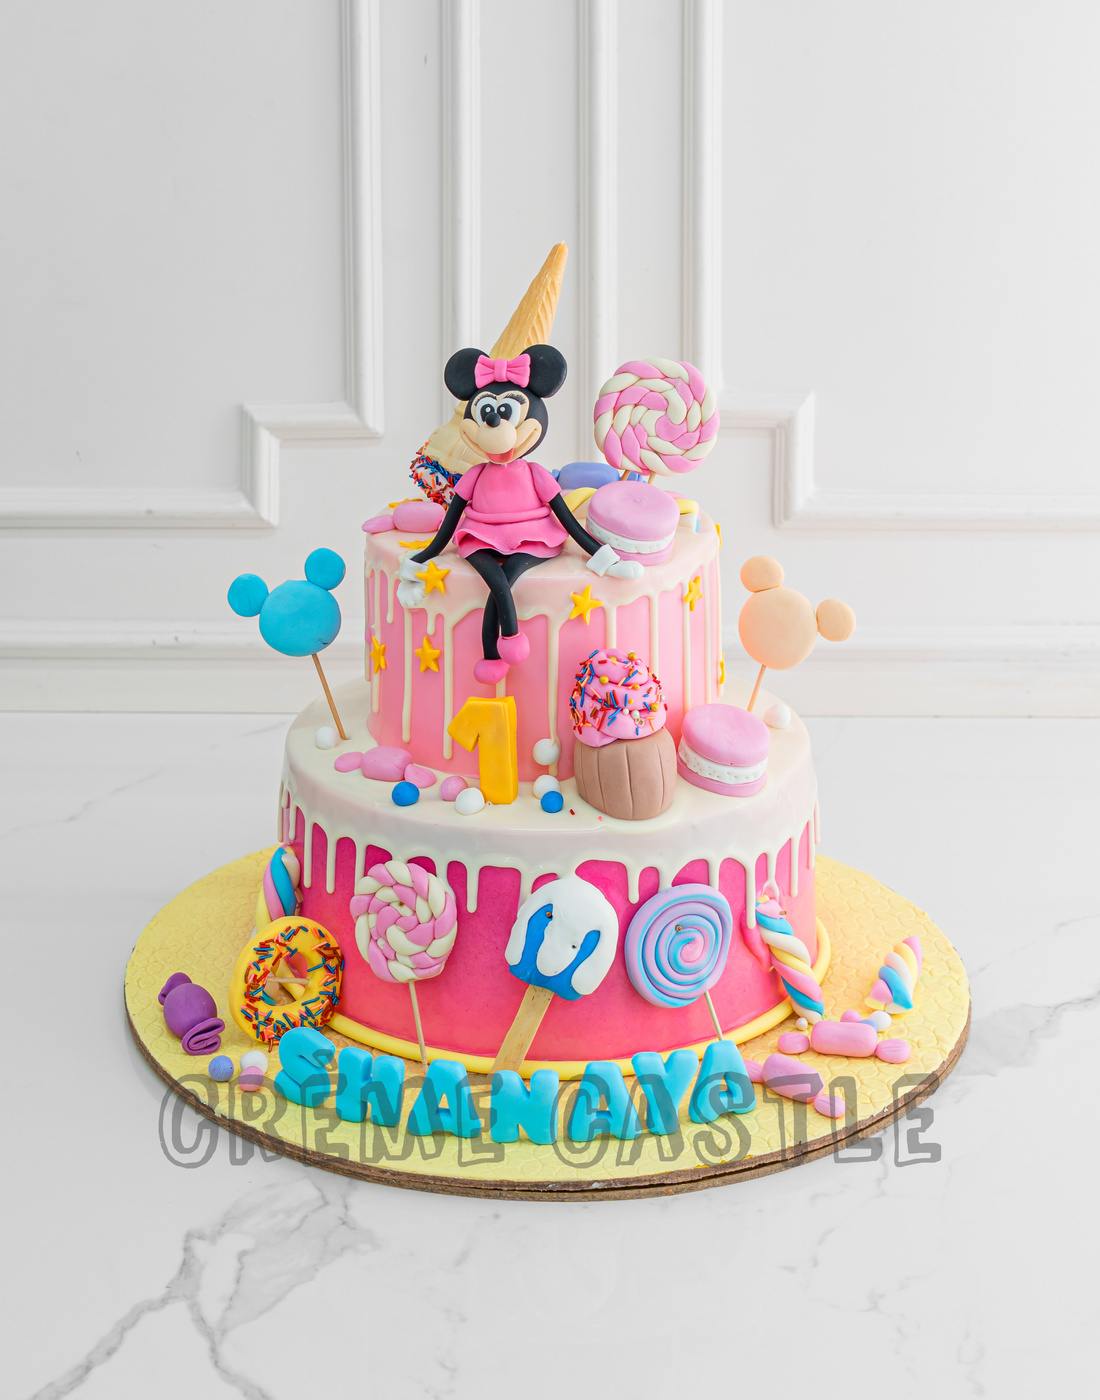 Minnie mouse themed cake😍💕 in 2023 | Minnie mouse birthday cakes, Minnie  mouse cake design, Minnie cake